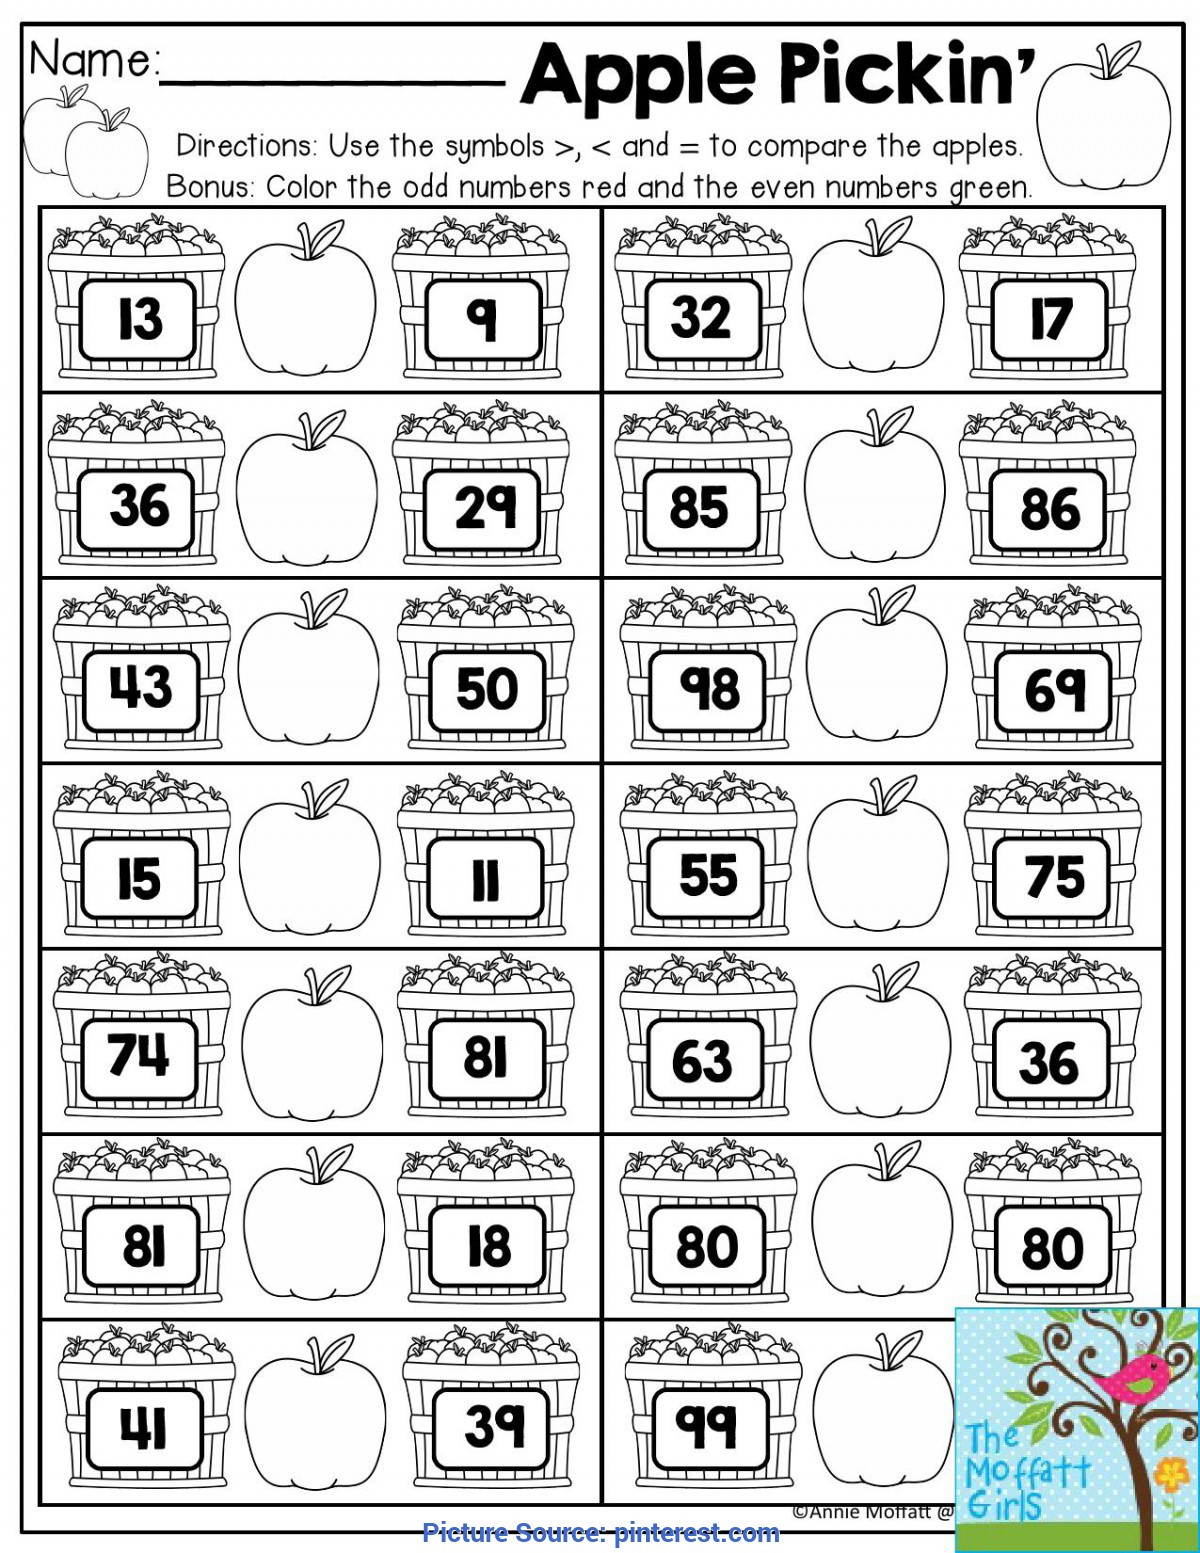 Comparing Numbers Worksheets 2nd Grade Fresh Paring Numbers Lesson Plan 2nd Grade Apple Pickin